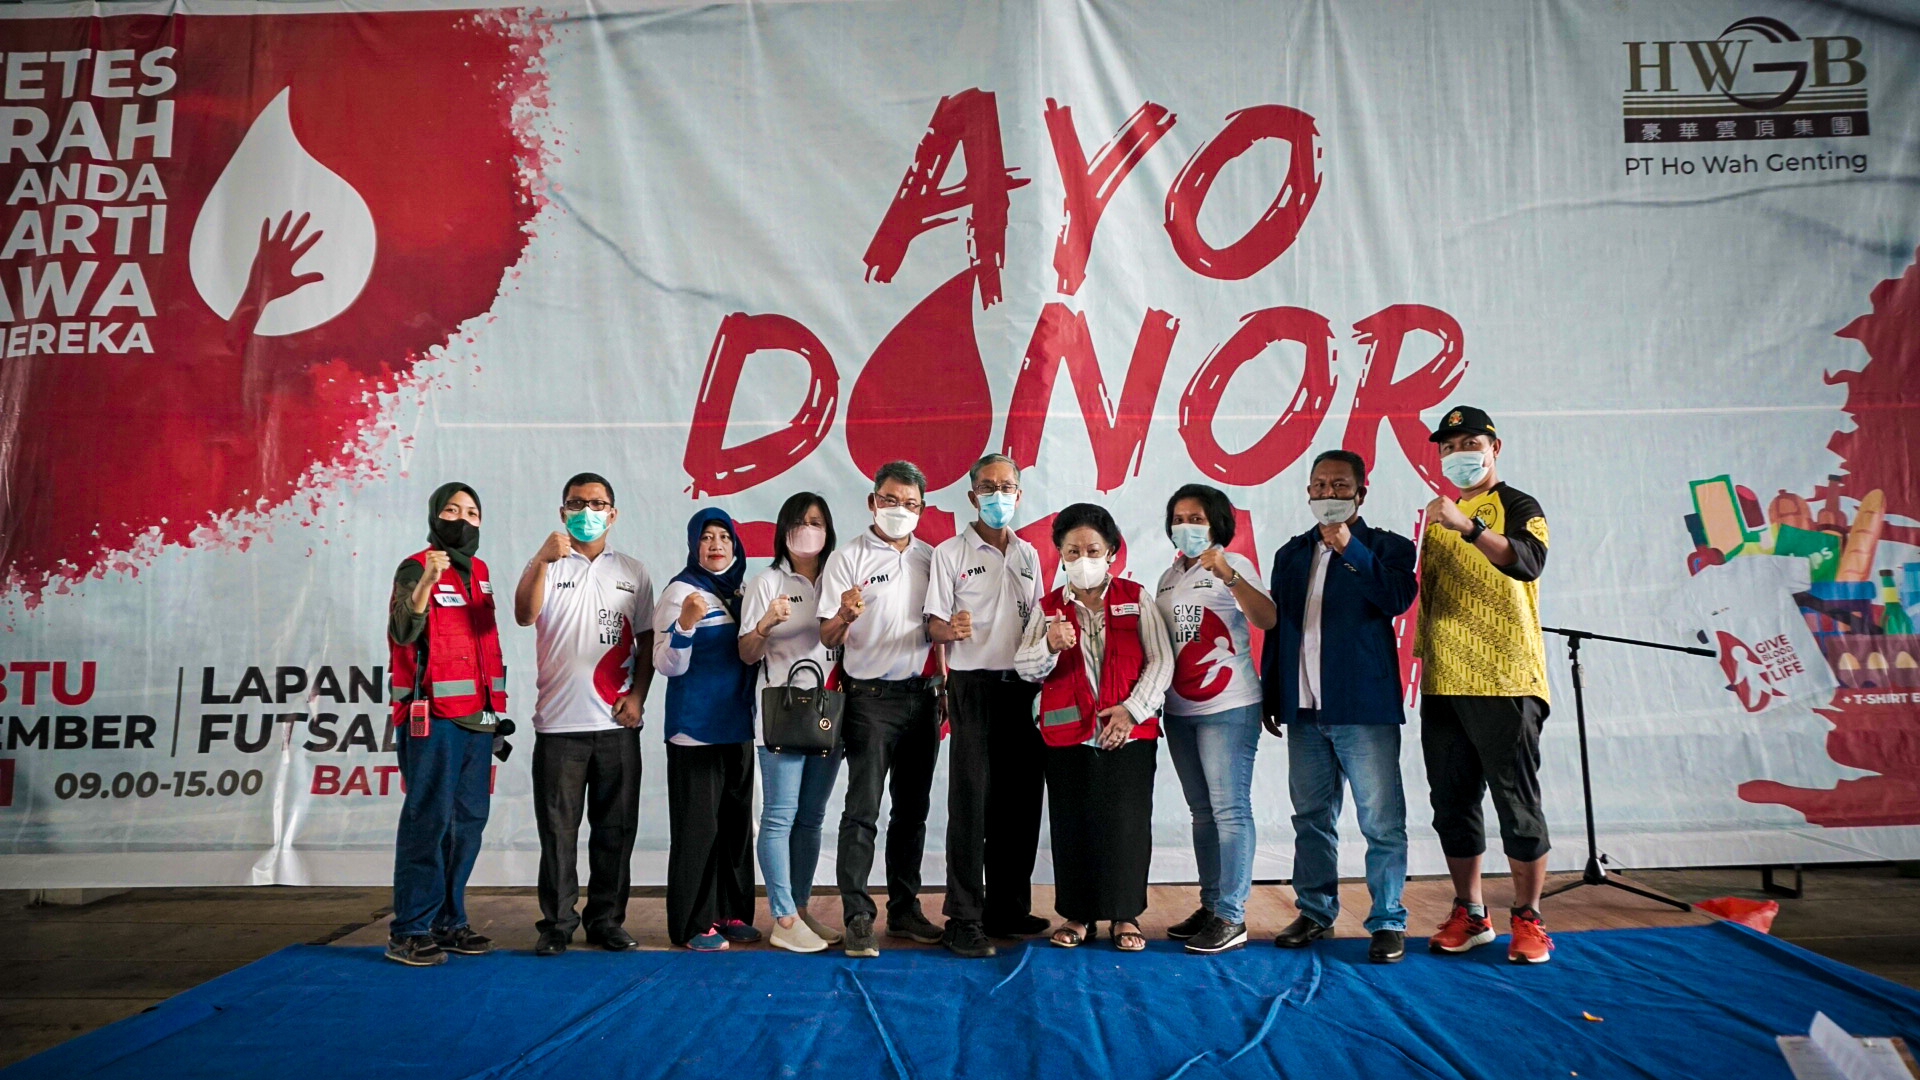 HW-GENTING GIVE BLOOD SAVE LIFE